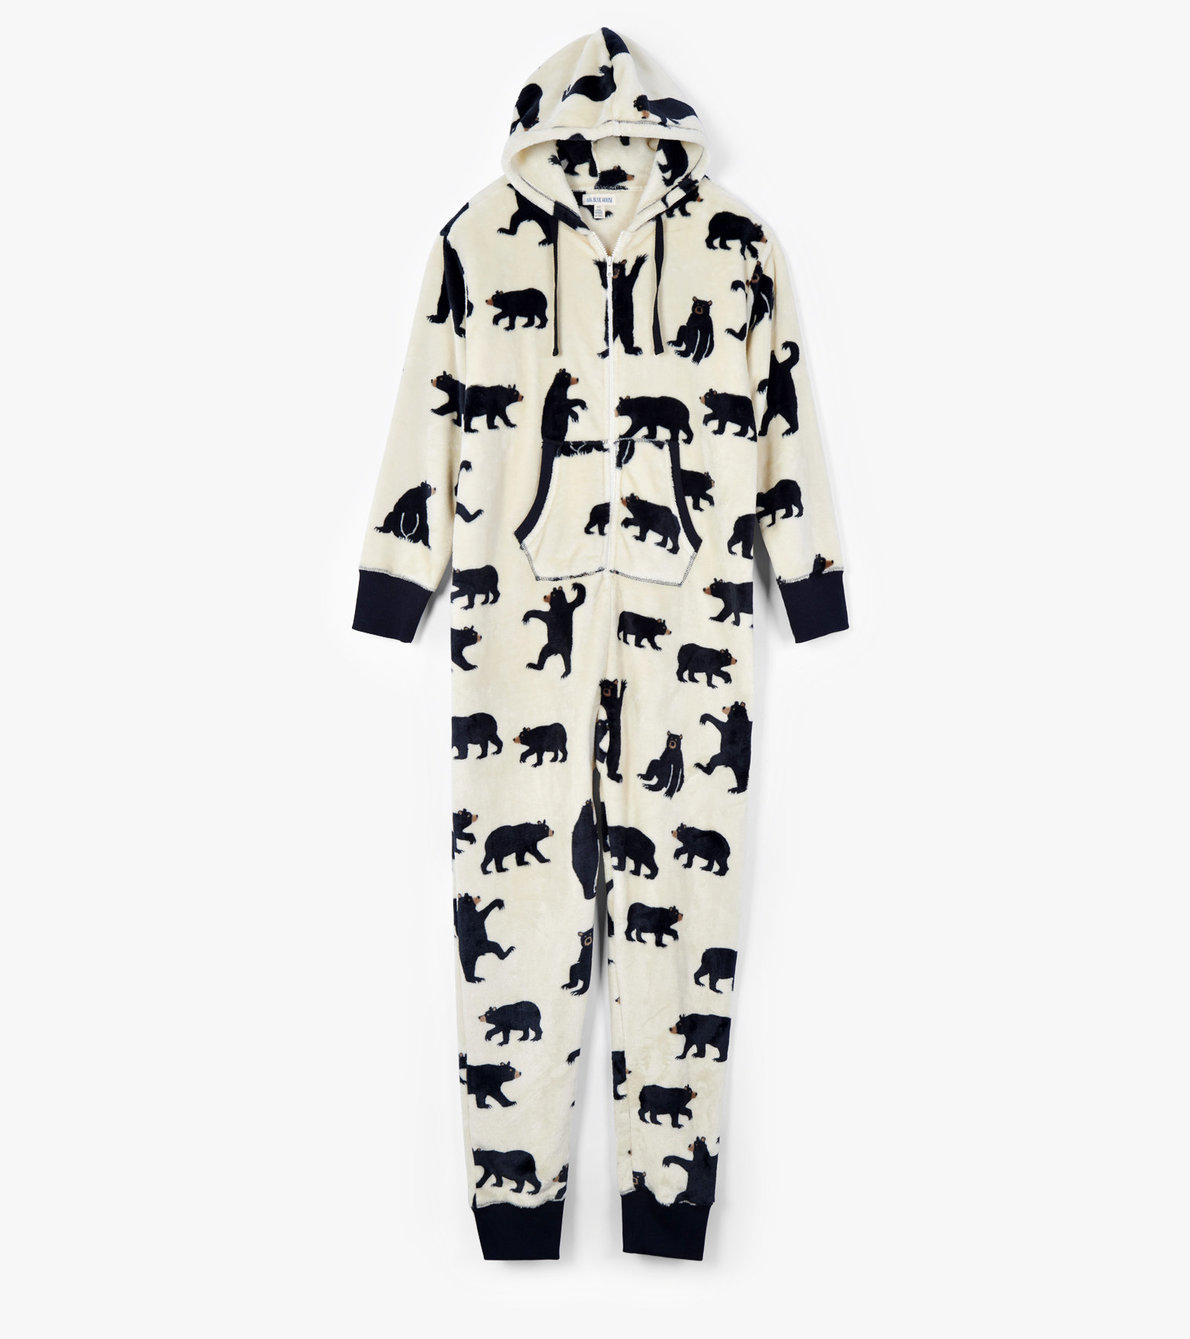 View larger image of Adult Black Bears Hooded Fleece Jumpsuit